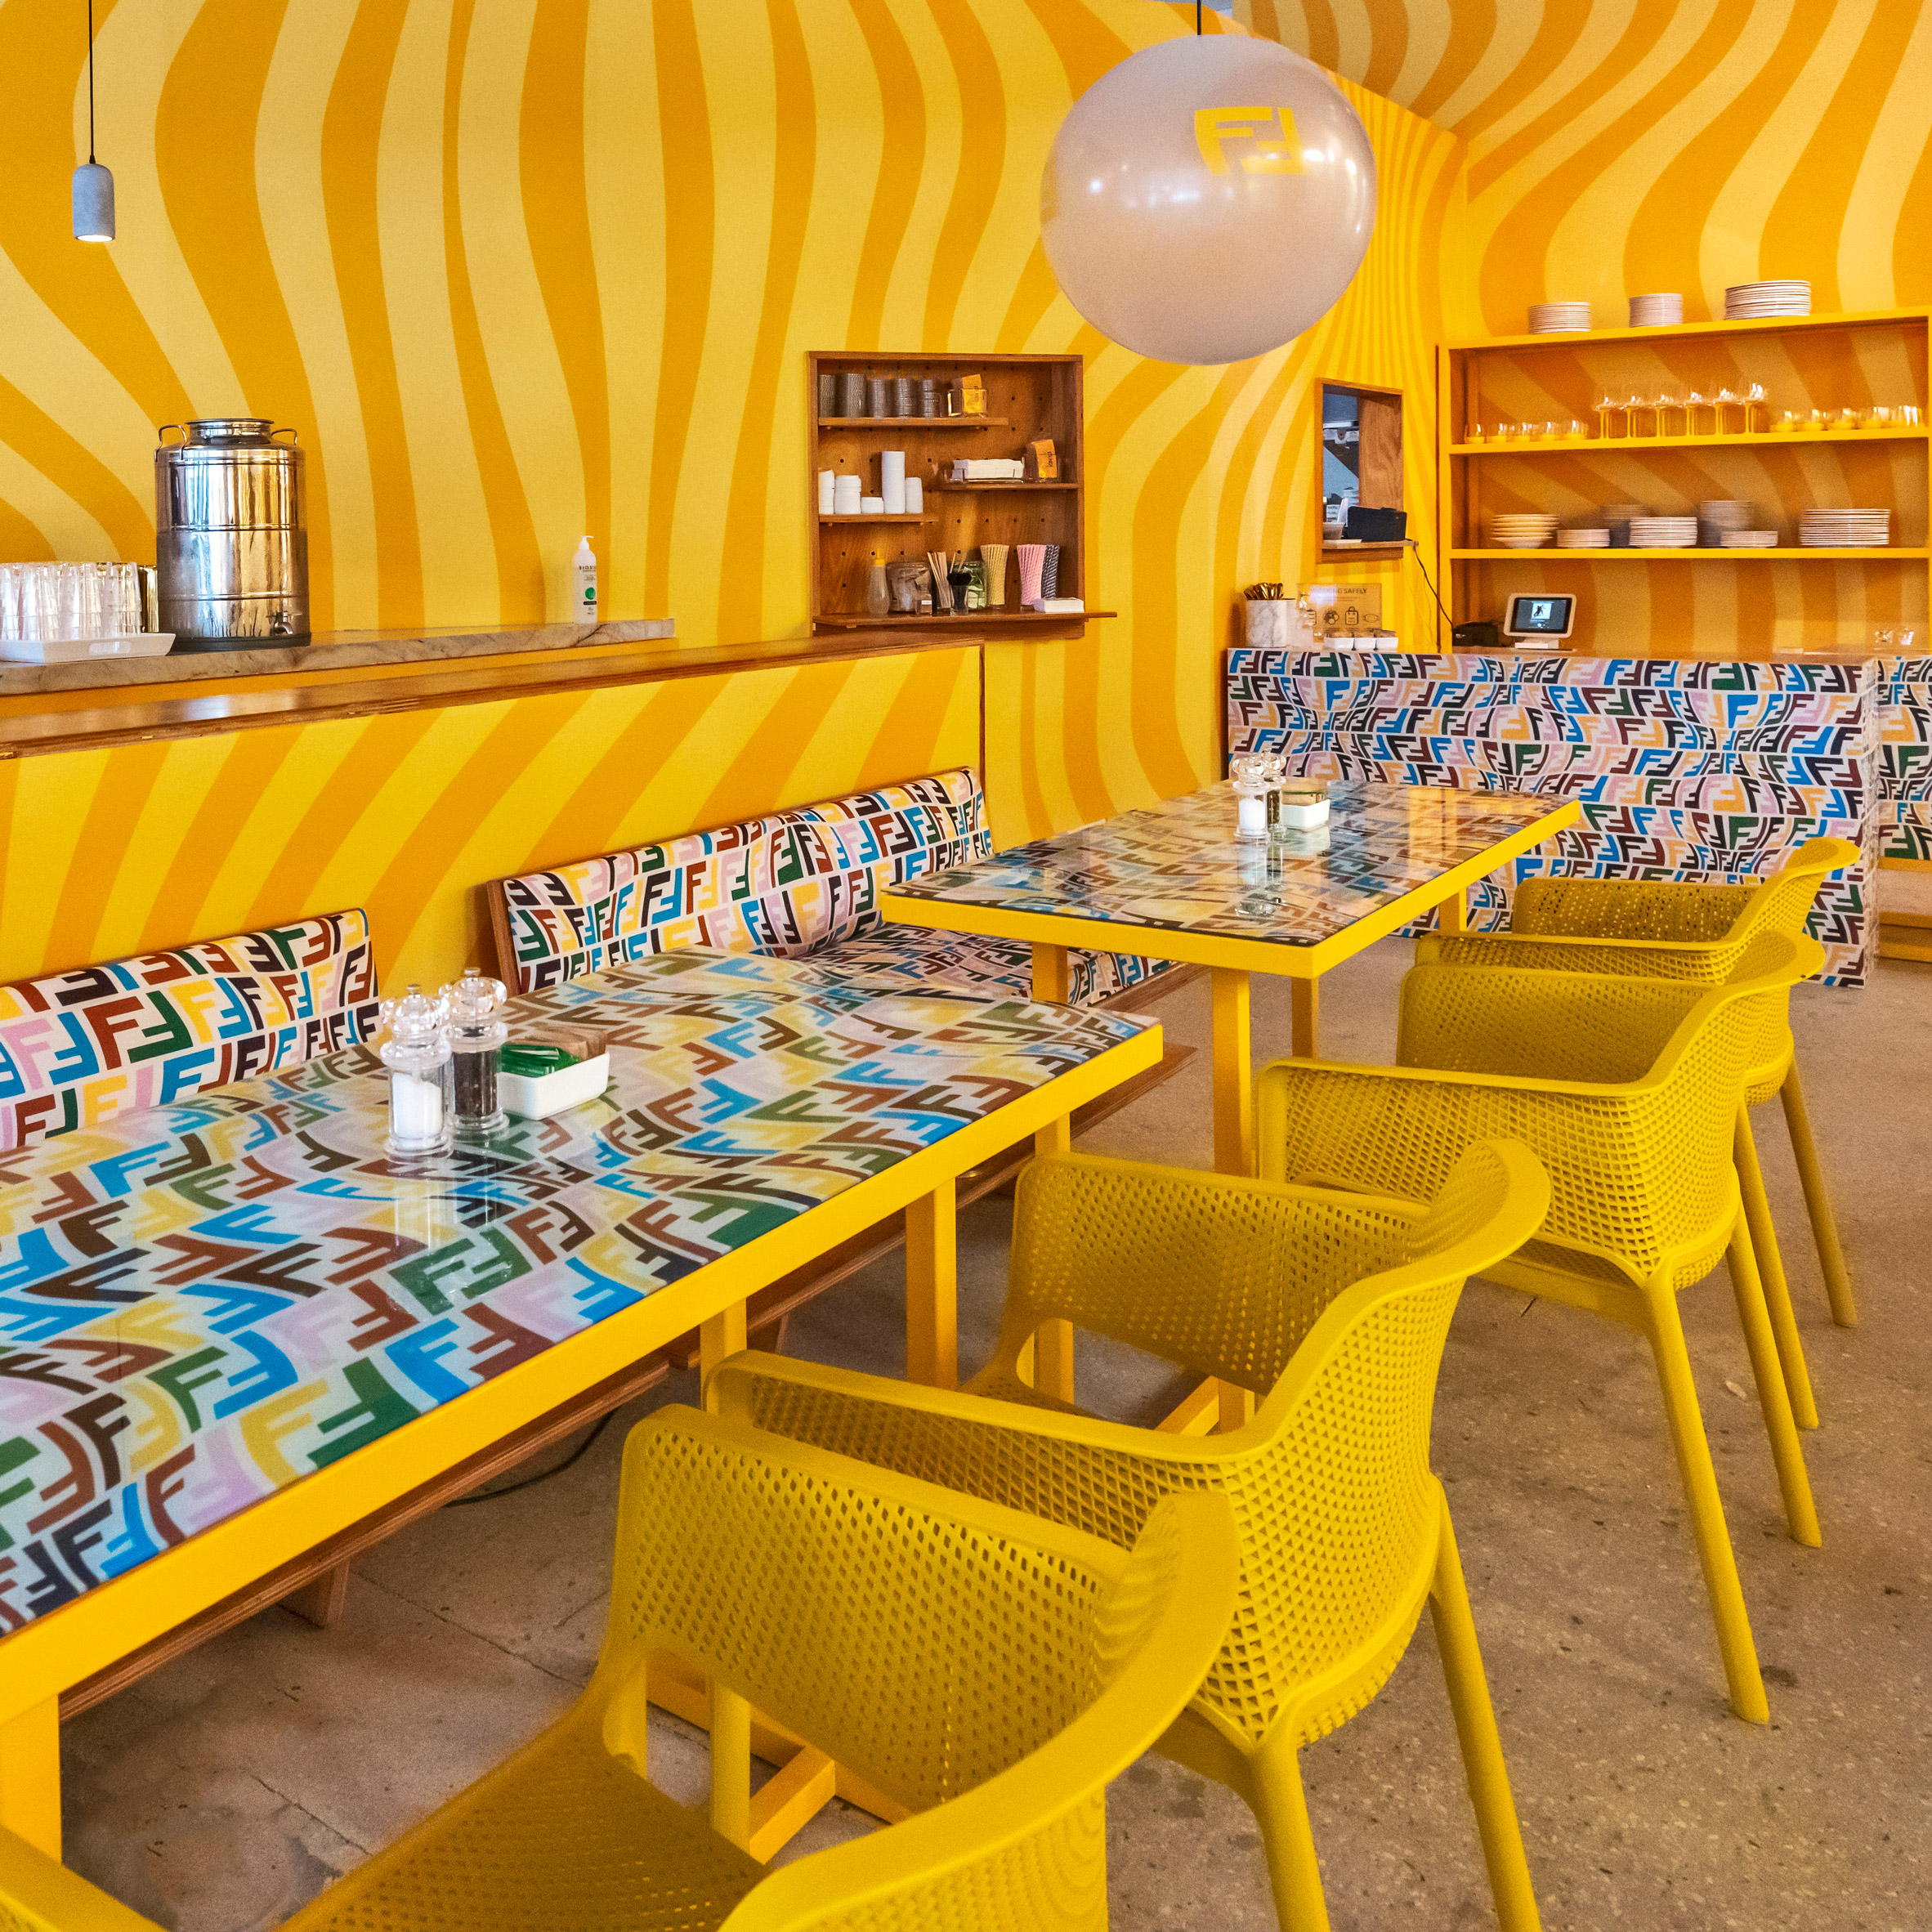 The Fendi Caffe features a psychedelic twist on the brand's logo